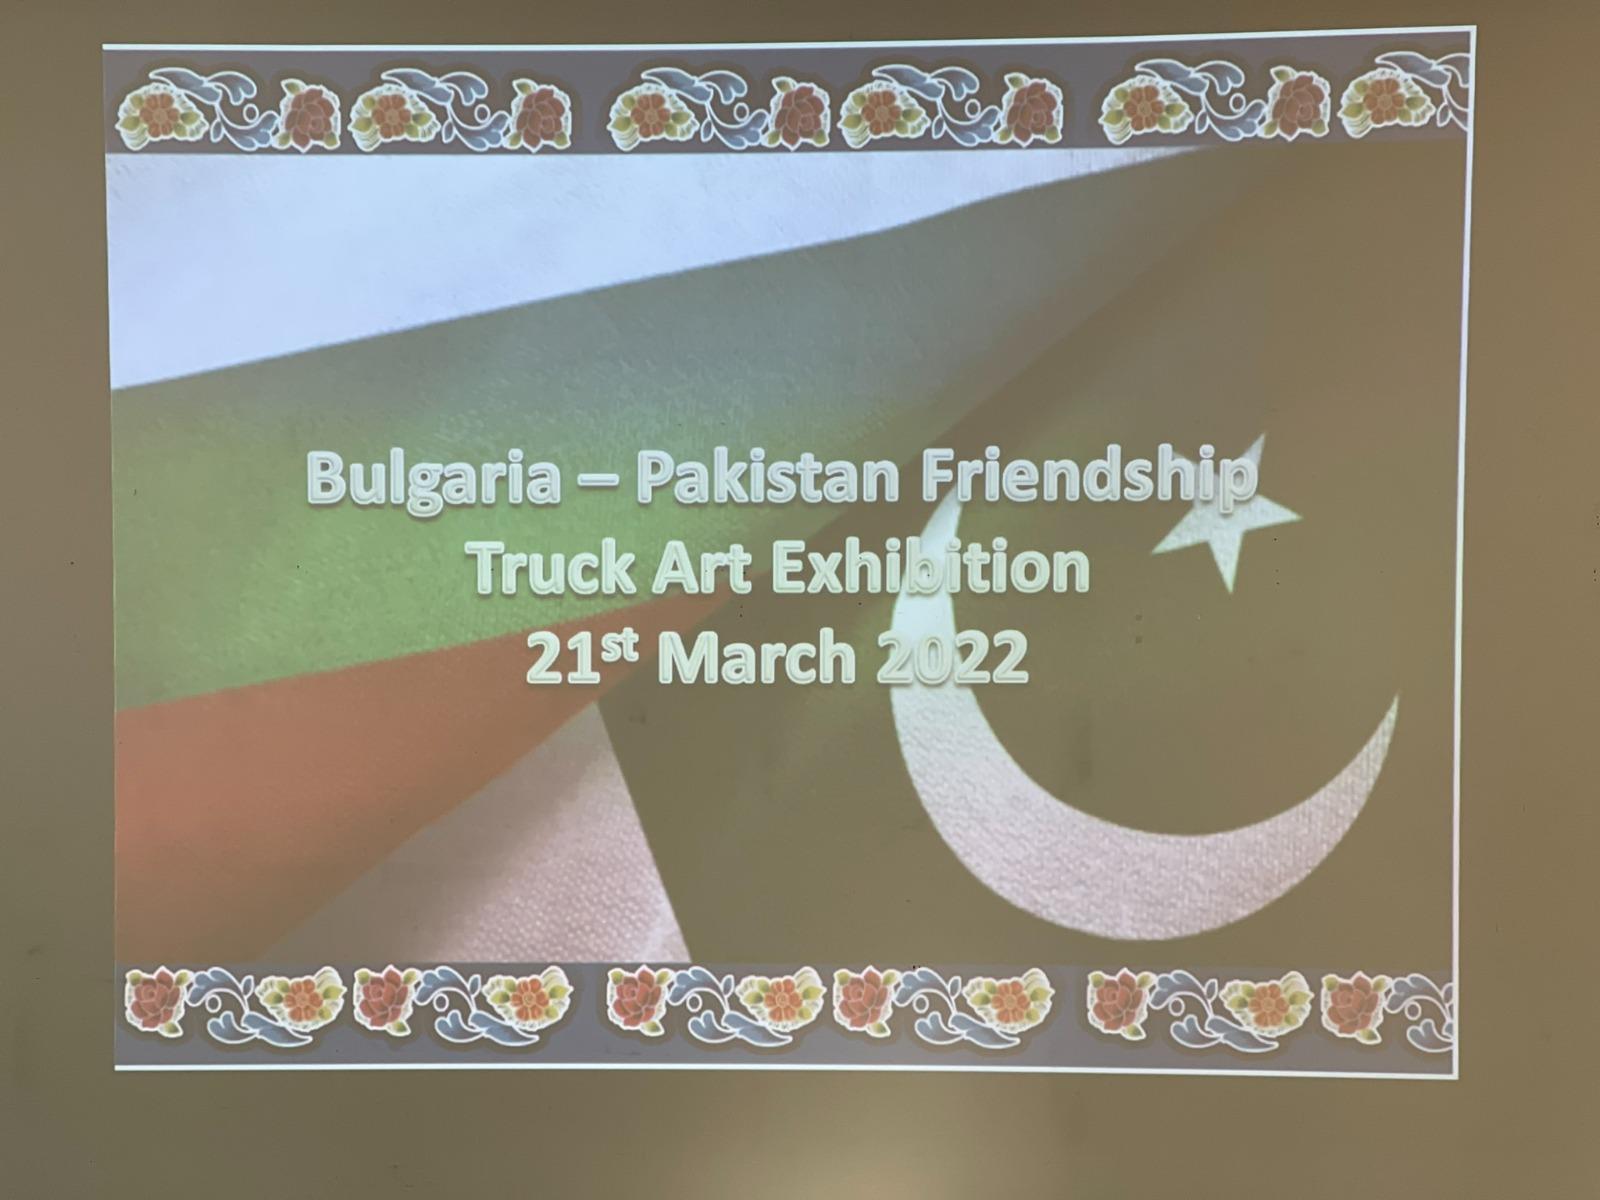 the-embassy-of-pakistan-in-sofia-bulgaria-in-collaboration-with-the-sredets-cultural-center